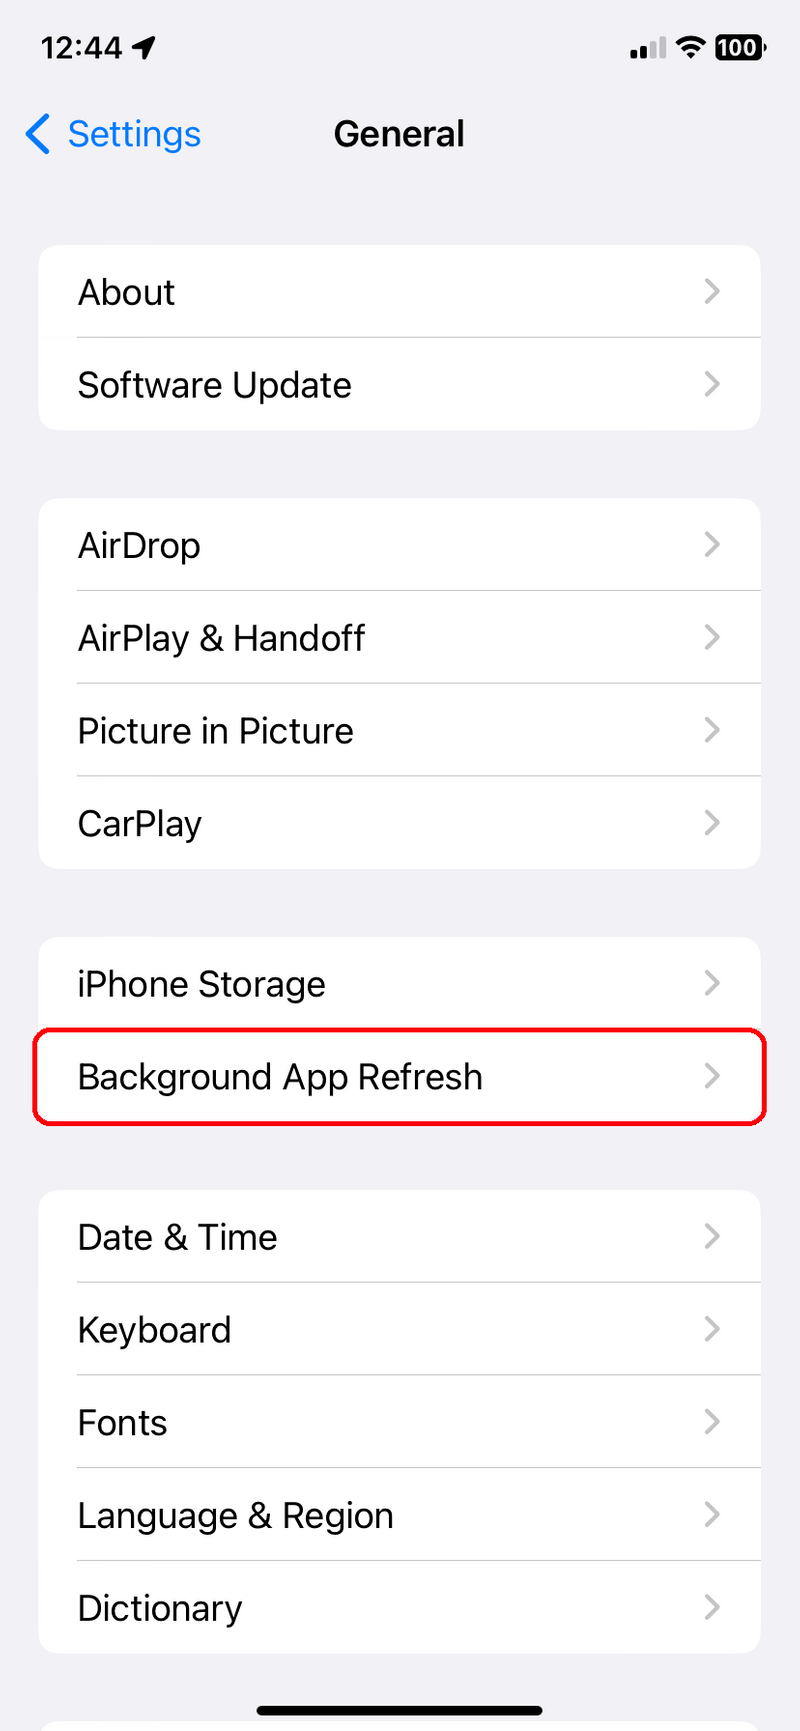 Settings >
         General  menu with Background App Refresh highlighted.